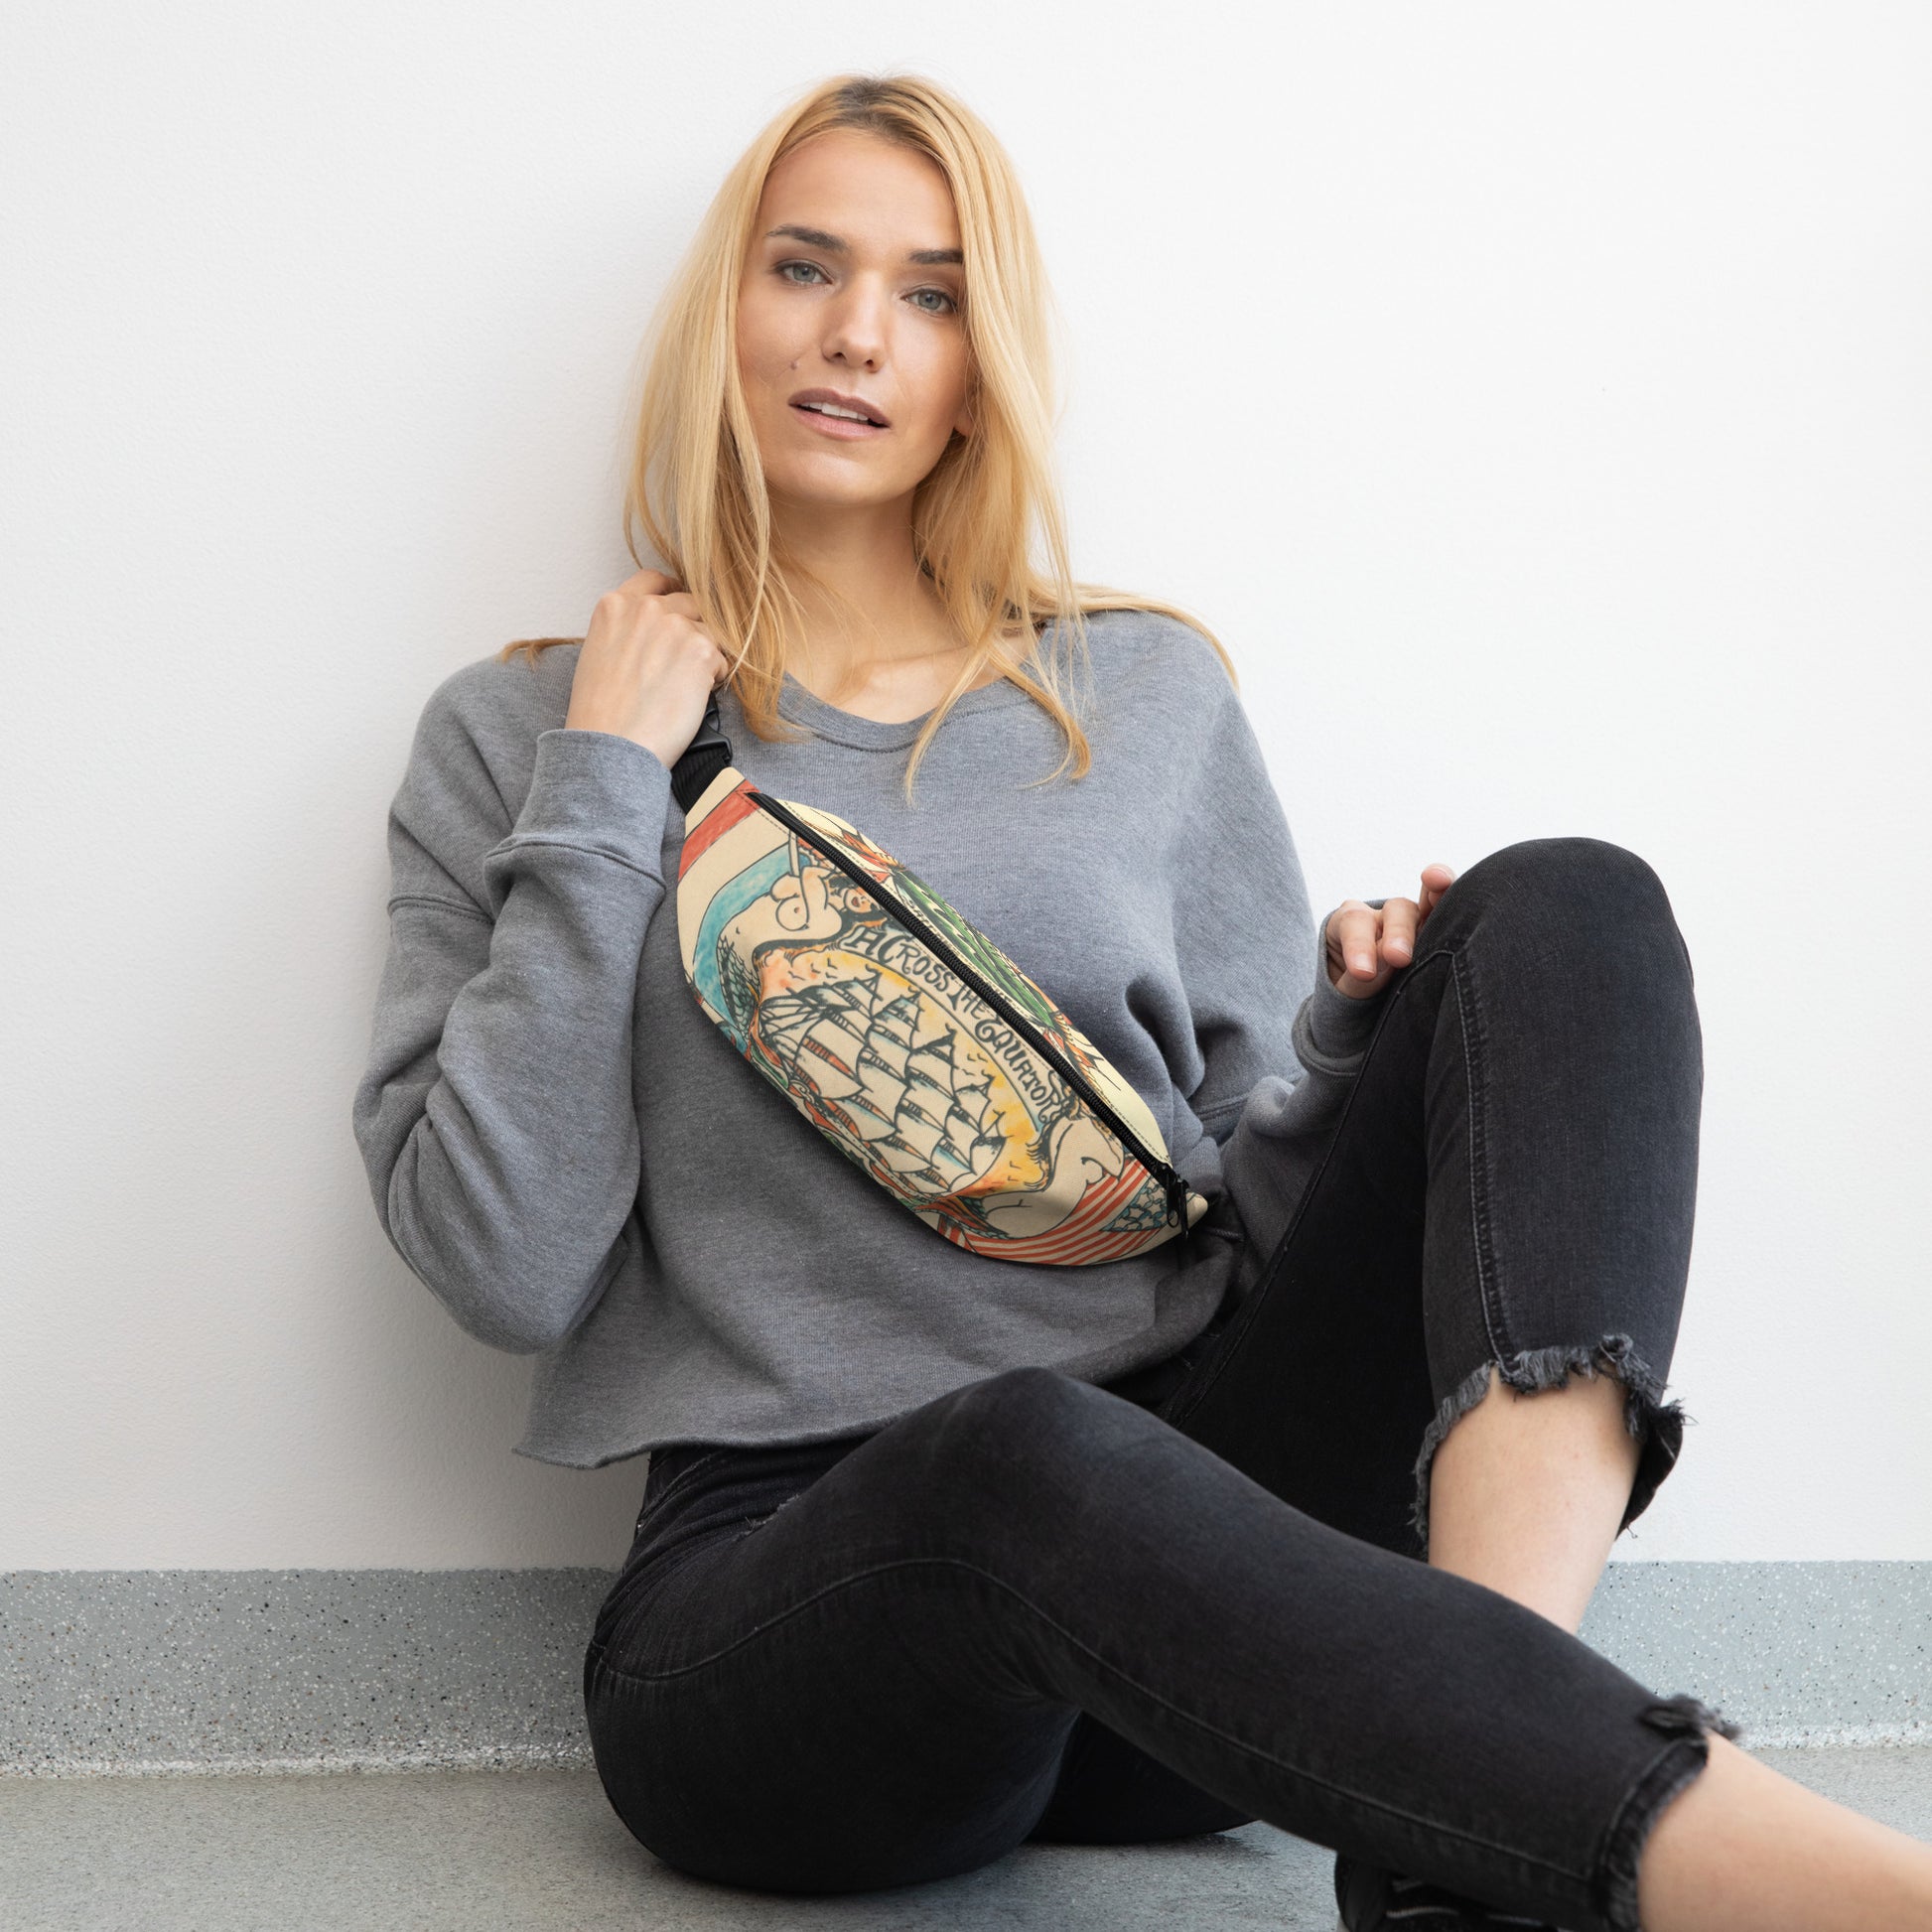 Fanny pack with unique ship design for safe keeping blonde girl wearing